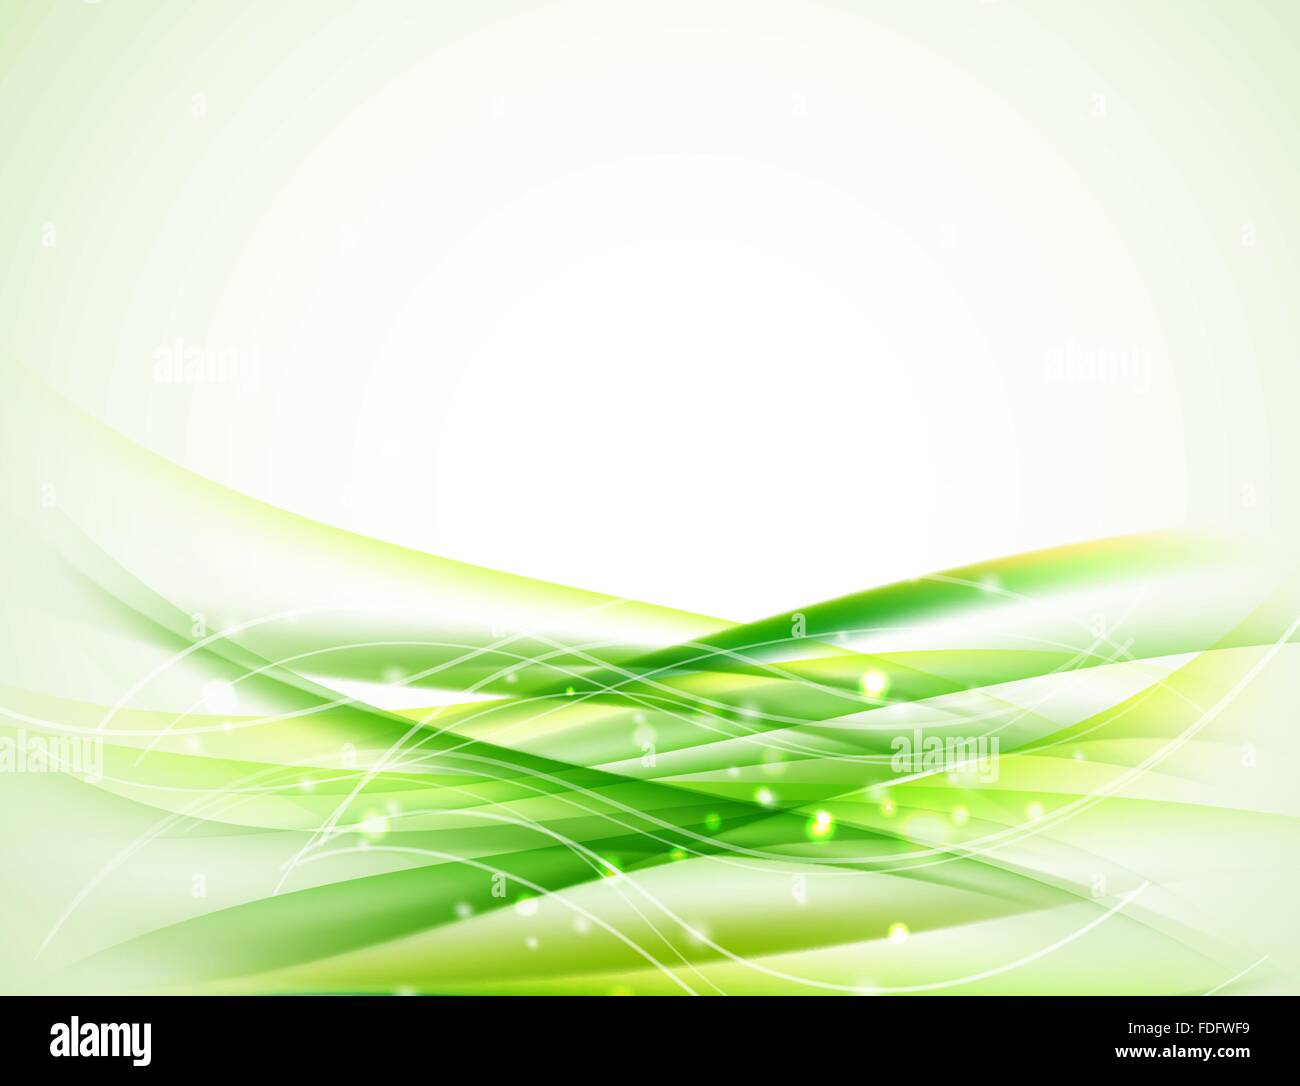 horizontal green abstract wavy background with sparkles and glittering design elements Stock Vector